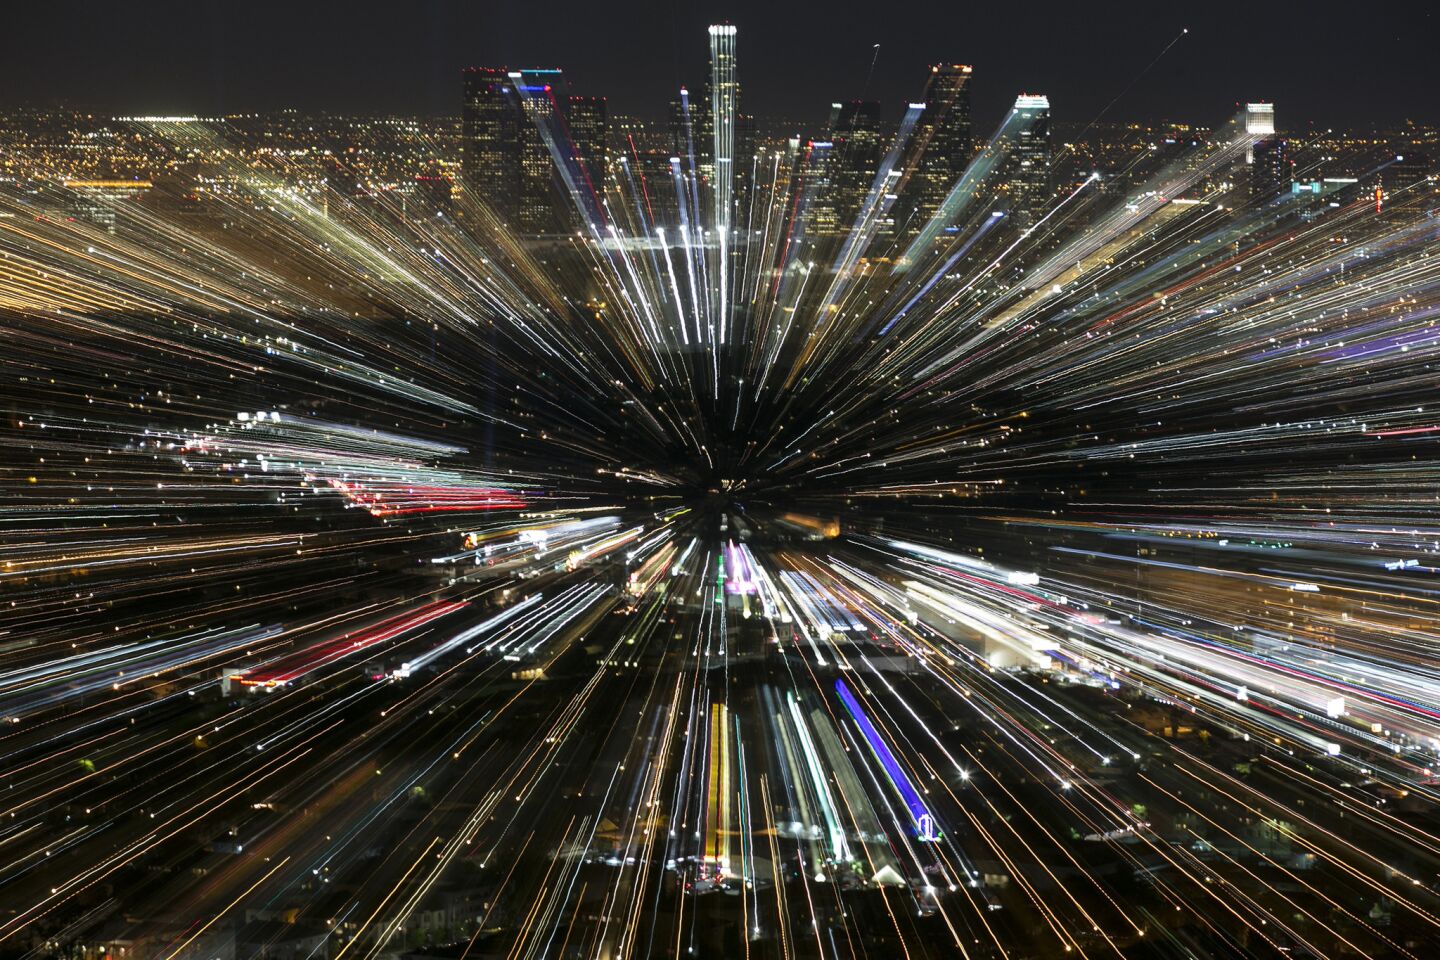 An effect created by zooming a telephoto lens during a 3 second exposure creates an explosion of light around the downtown skyline, seen from the Griffith Observatory.